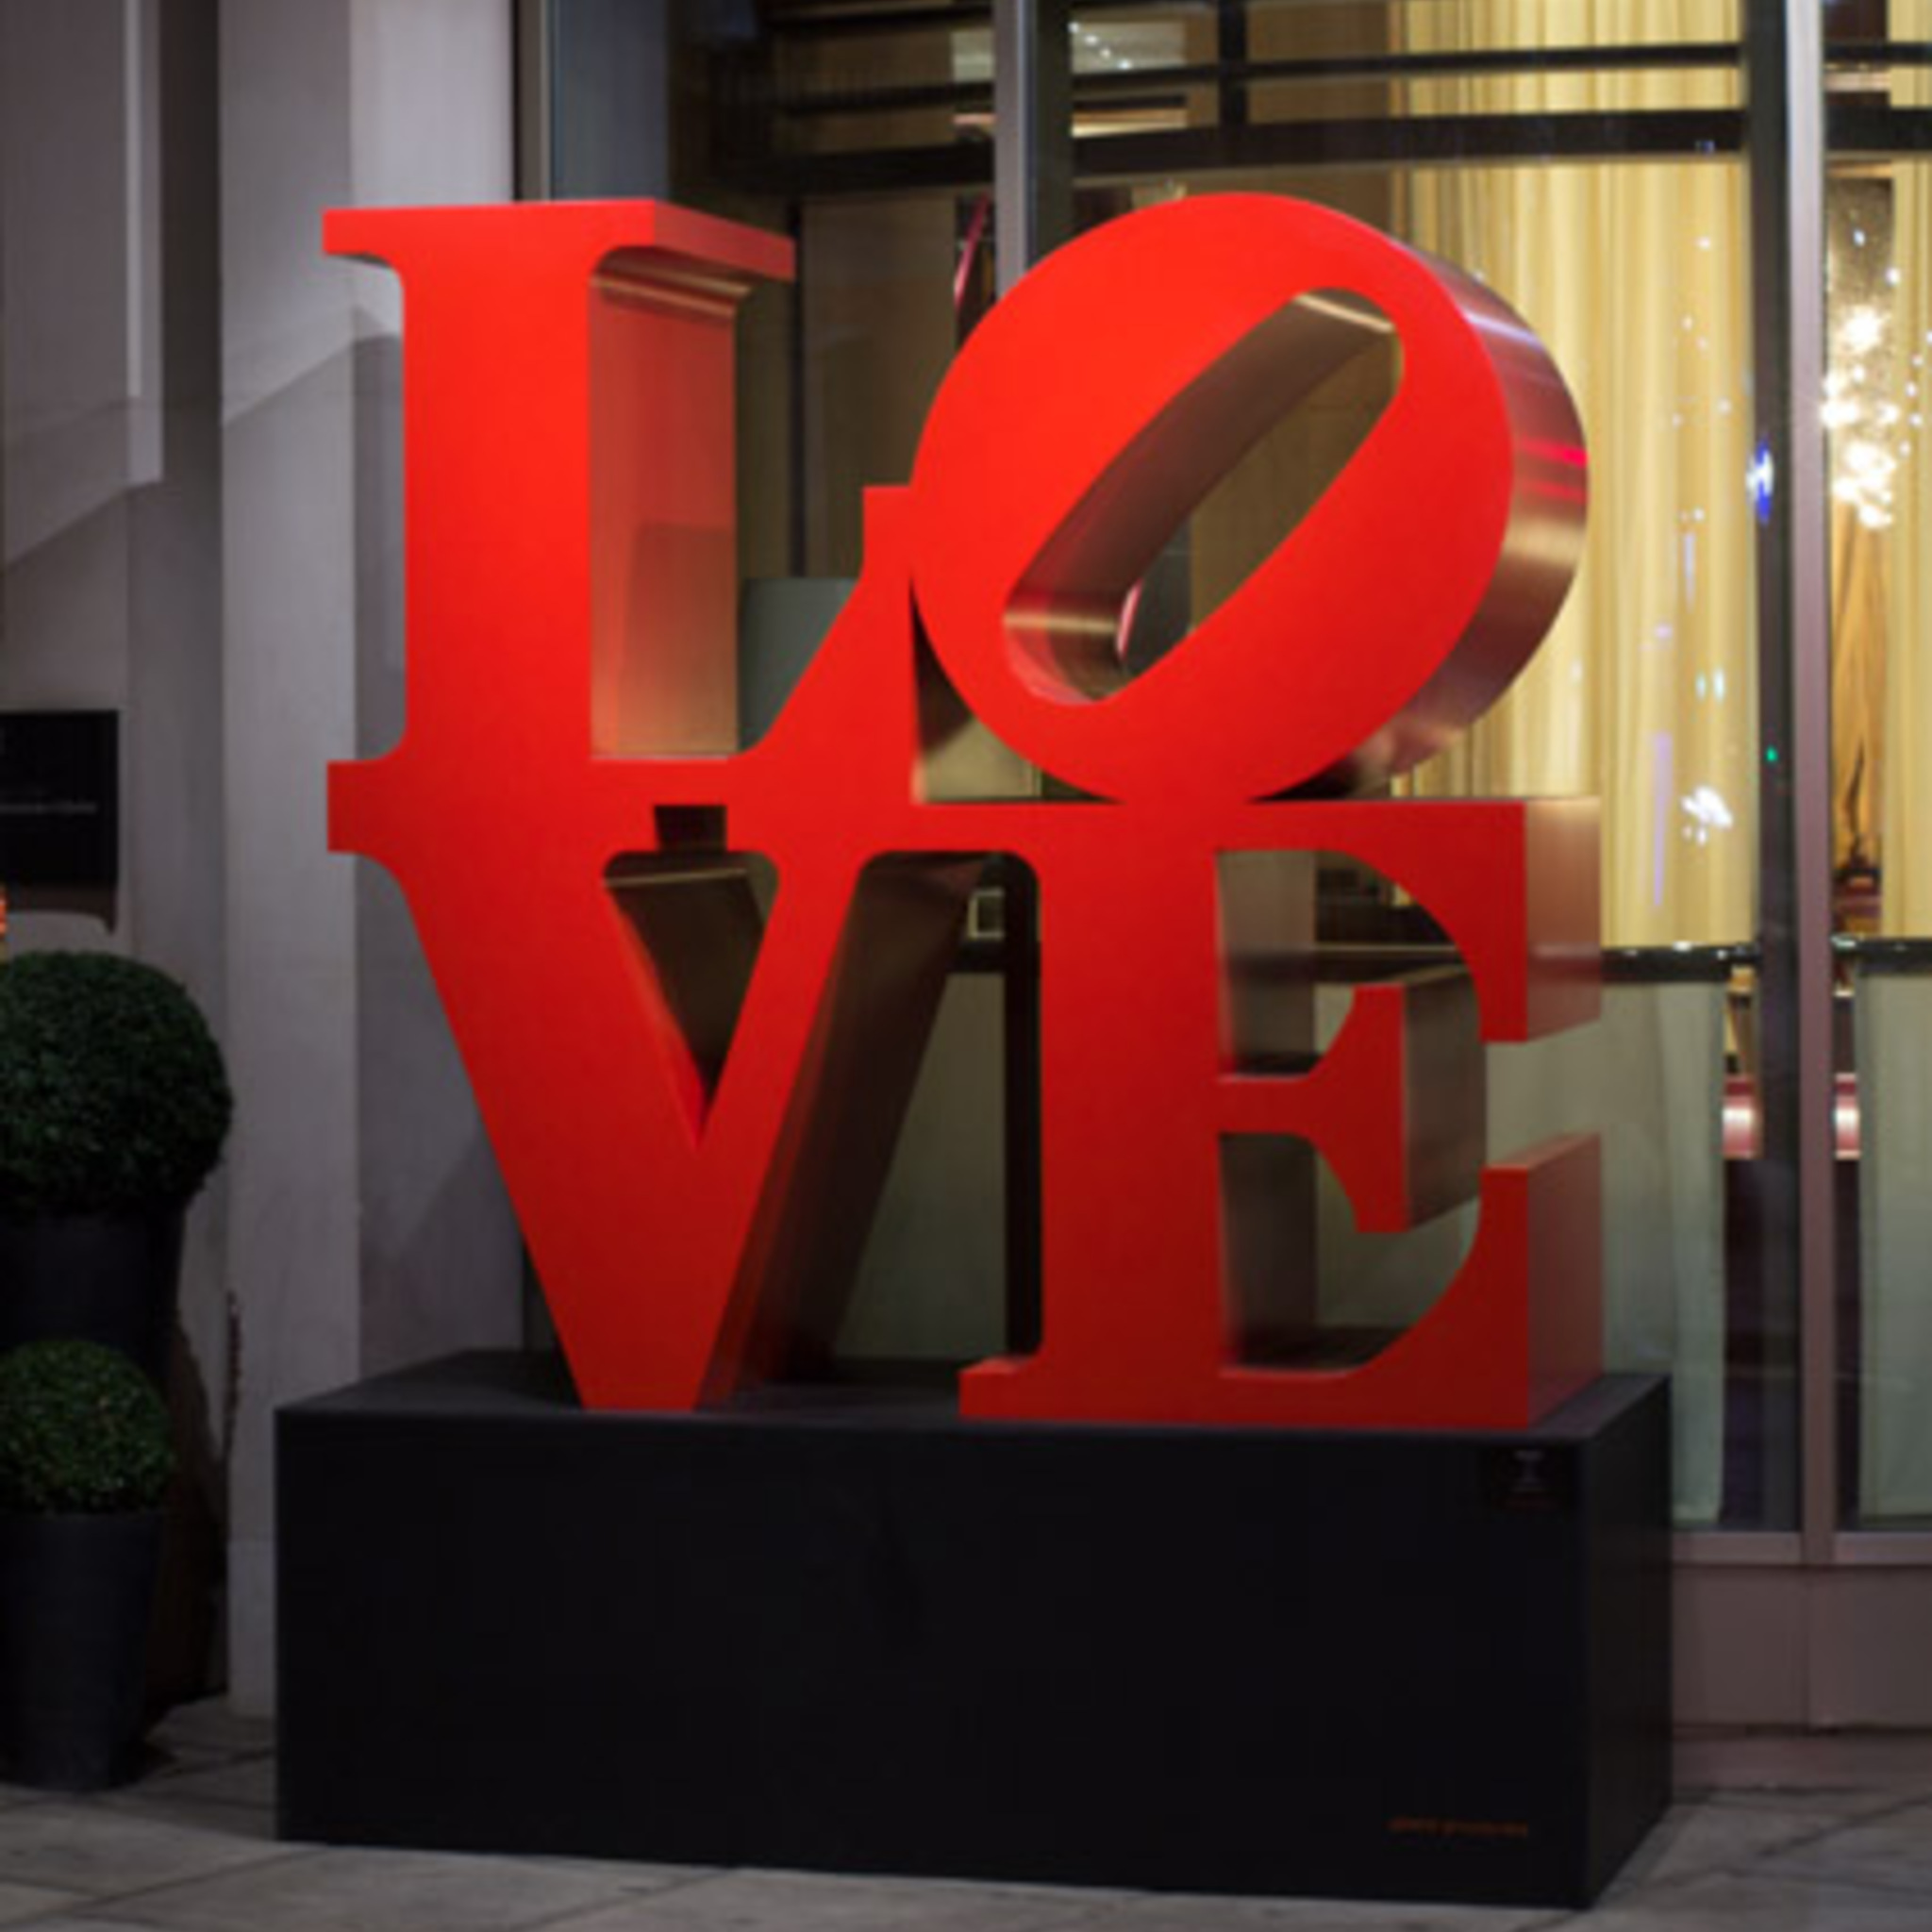 The exhibition Robert Indiana. To Russia with LOVE